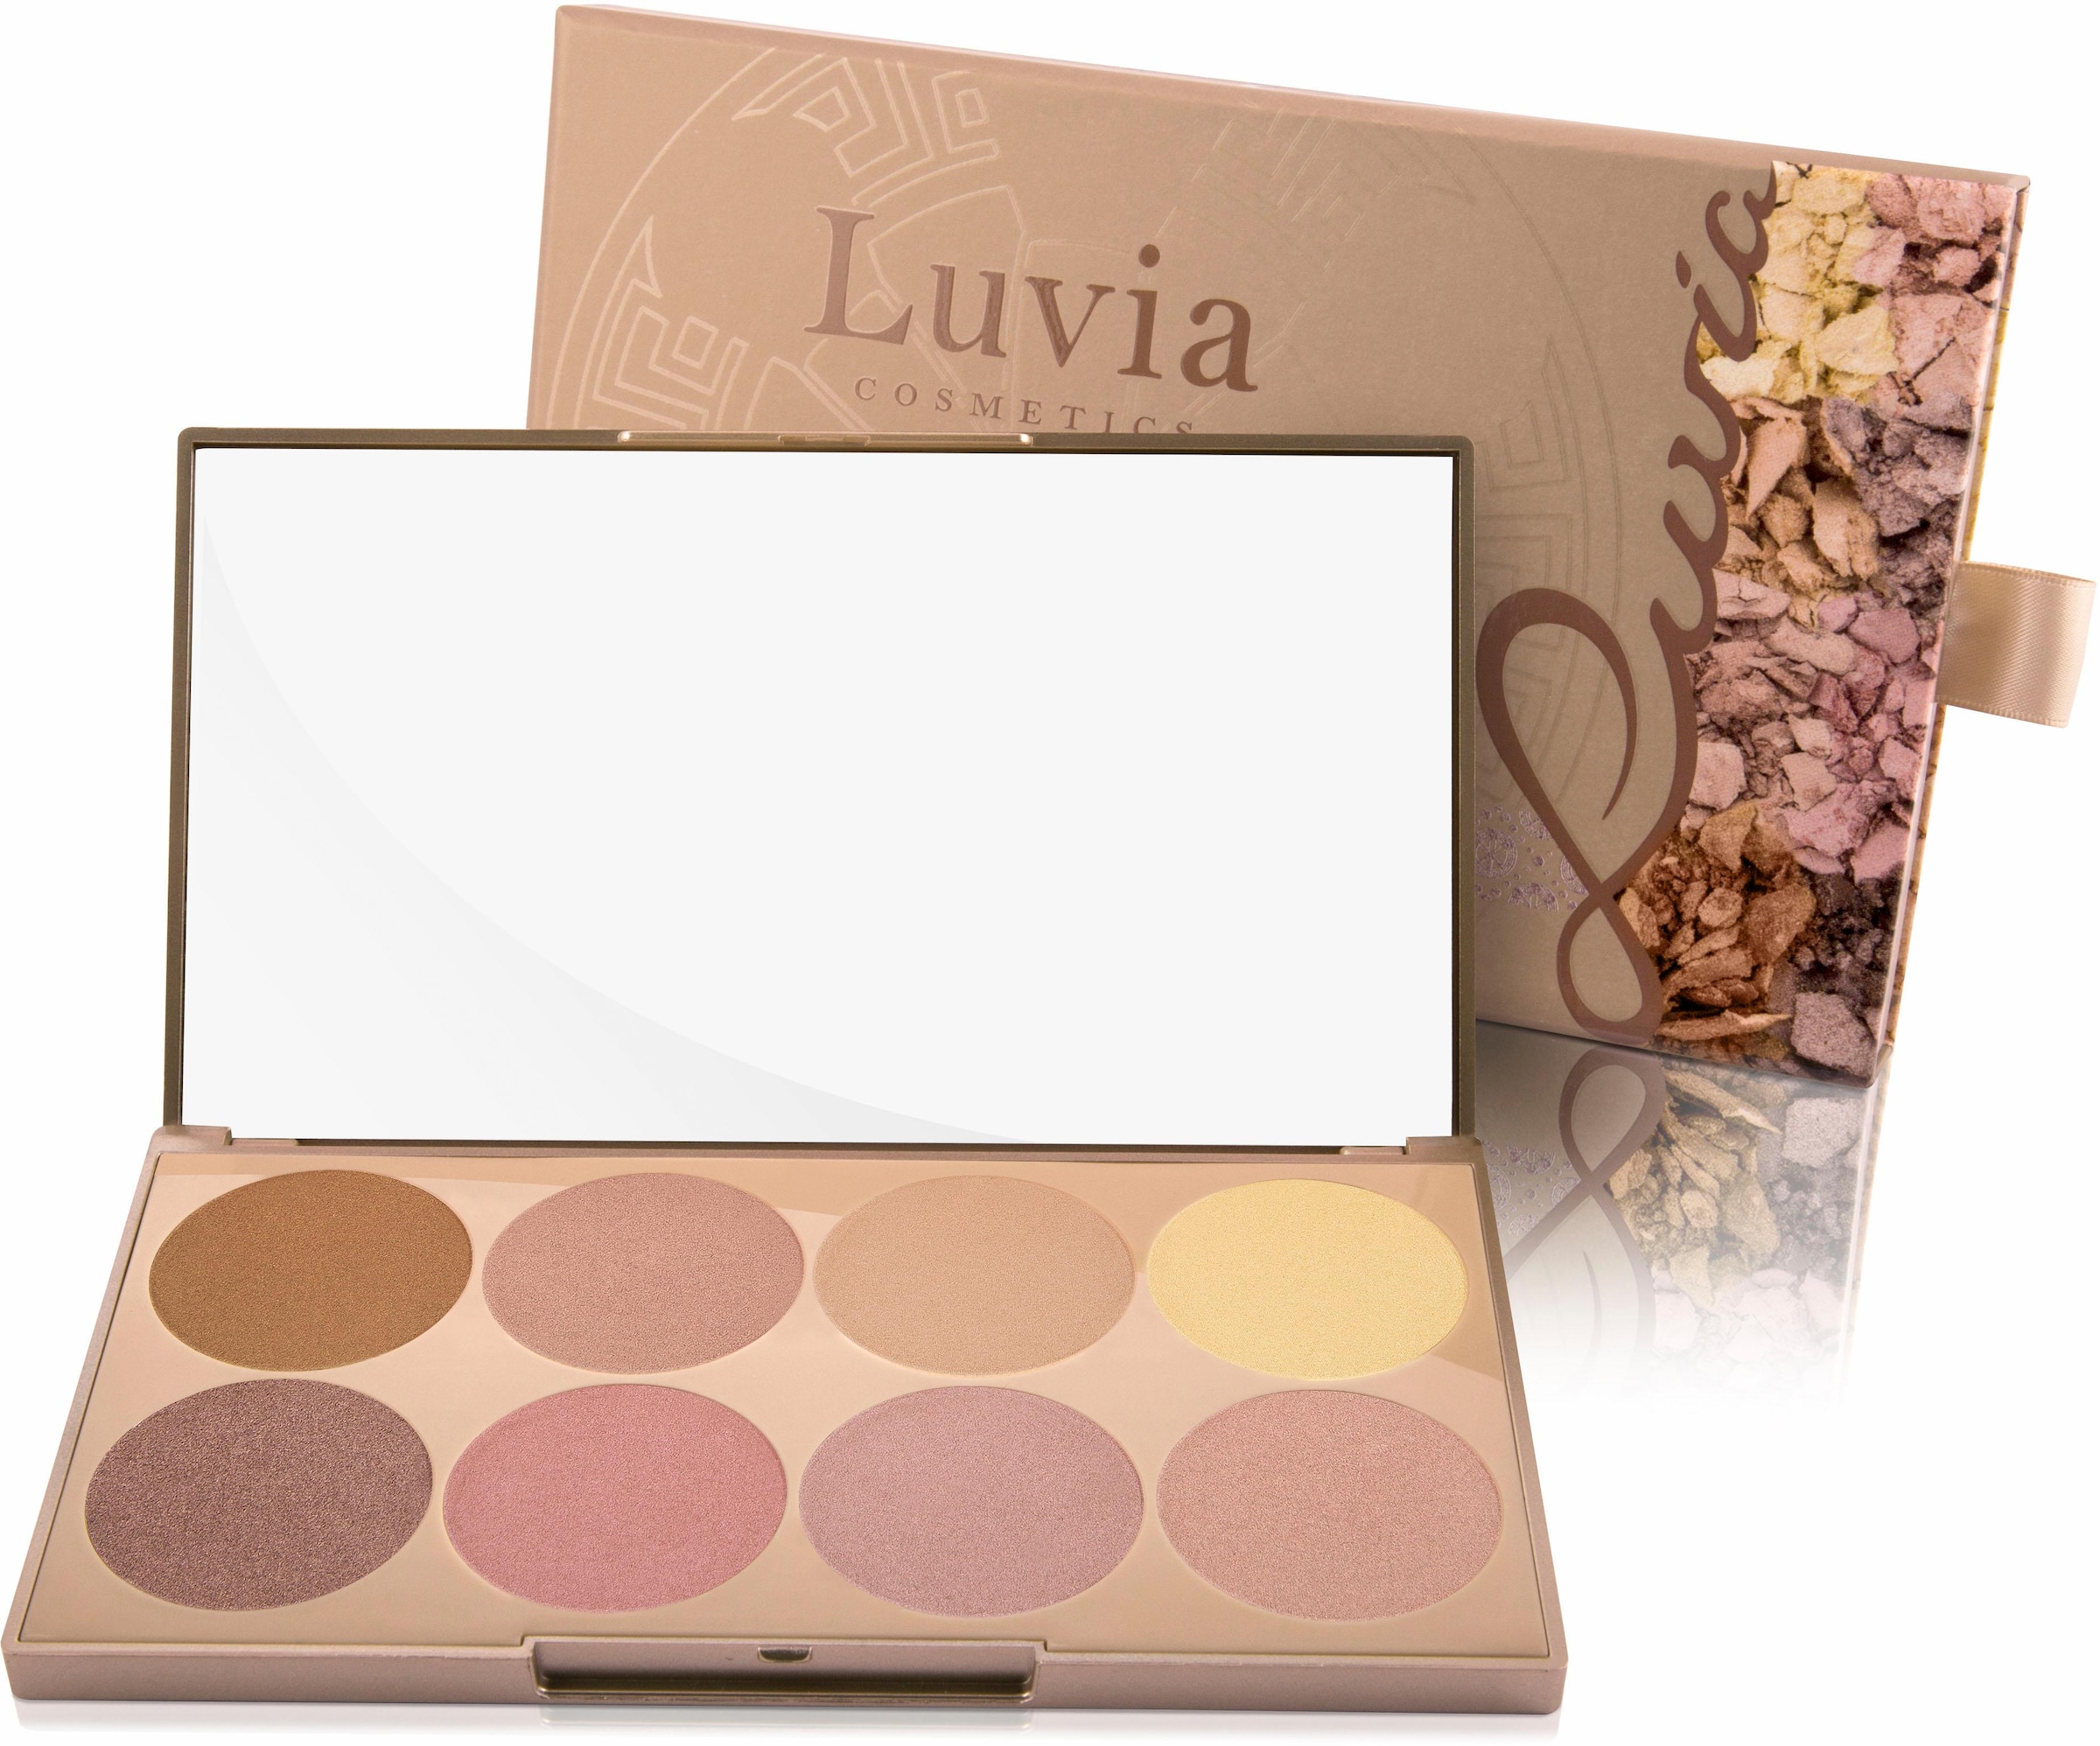 Luvia Cosmetics Highlighter-Palette »Prime Glow Essential Contouring Shades  Vol. 1« (8 tlg.) 8 Farben